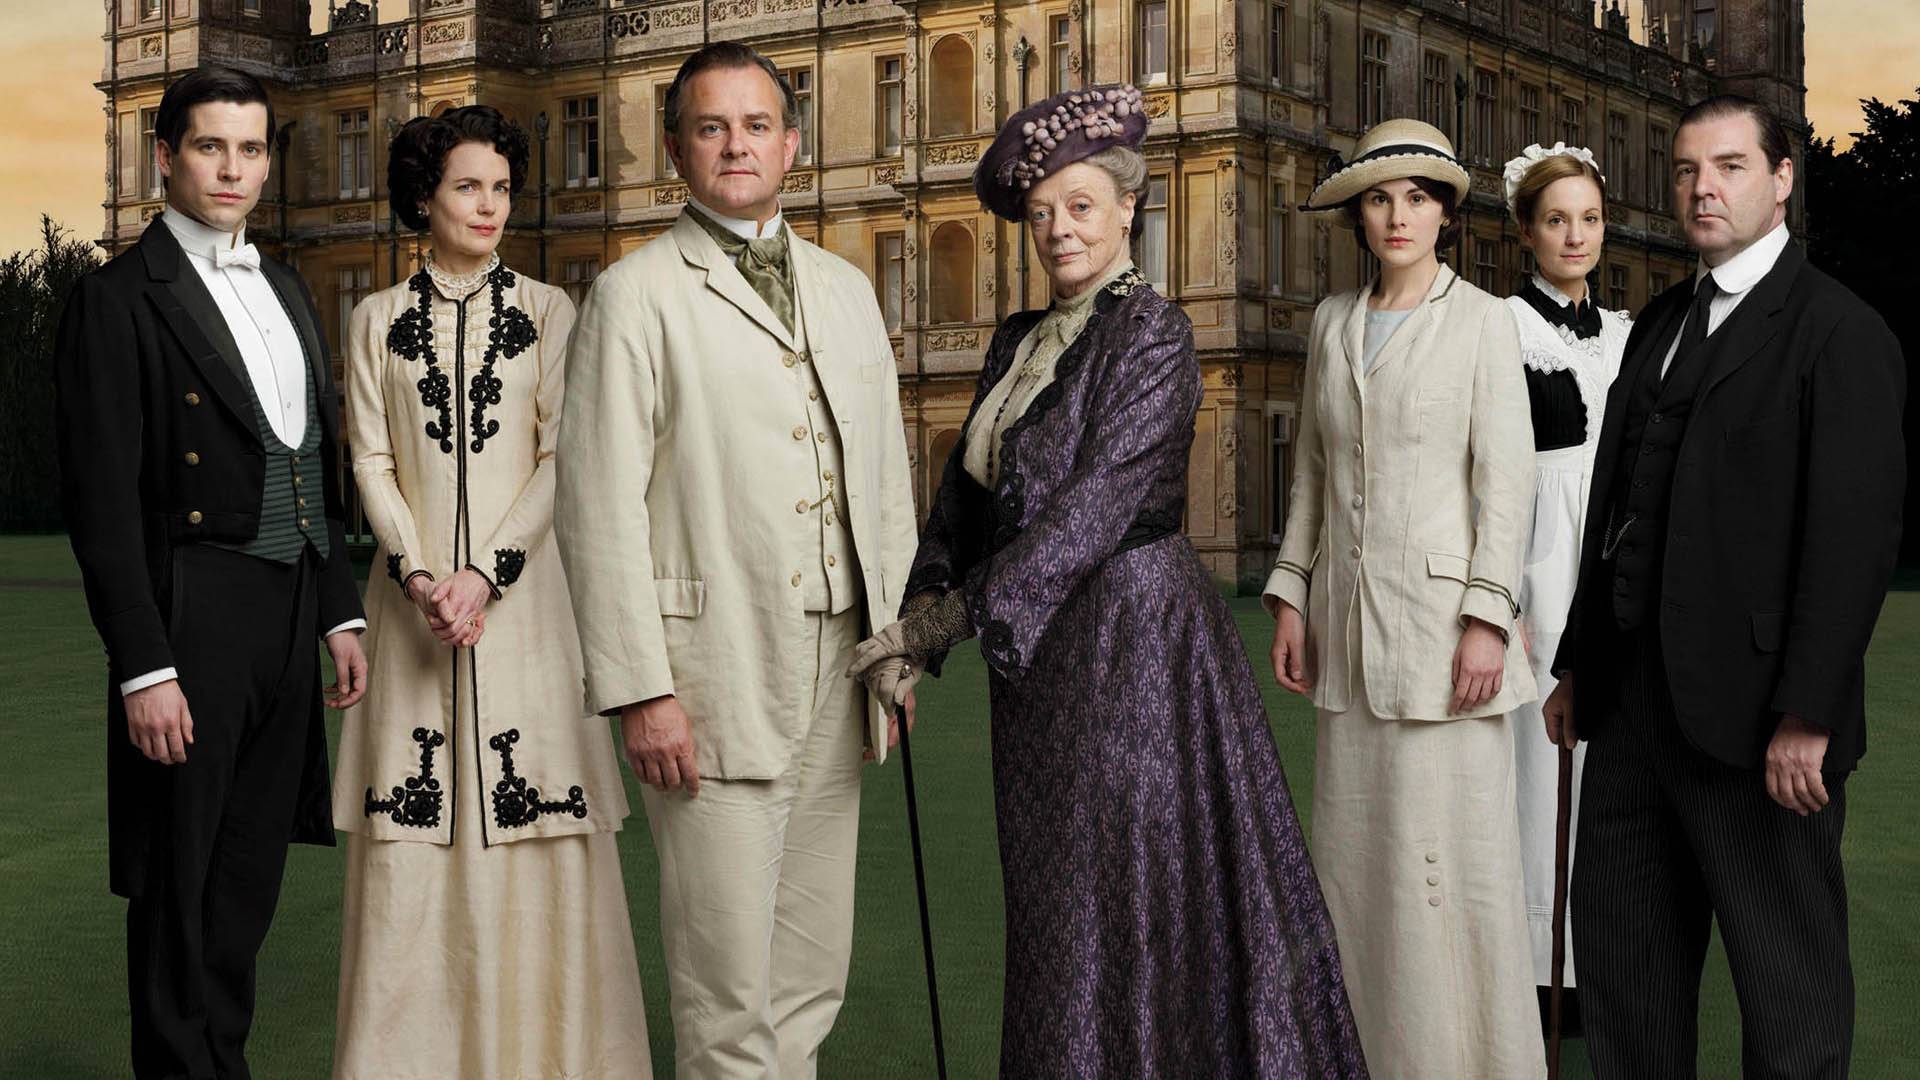 http://s1.bwallpapers.com/wallpapers/2014/01/06/downton-abbey-film_114053.jpg